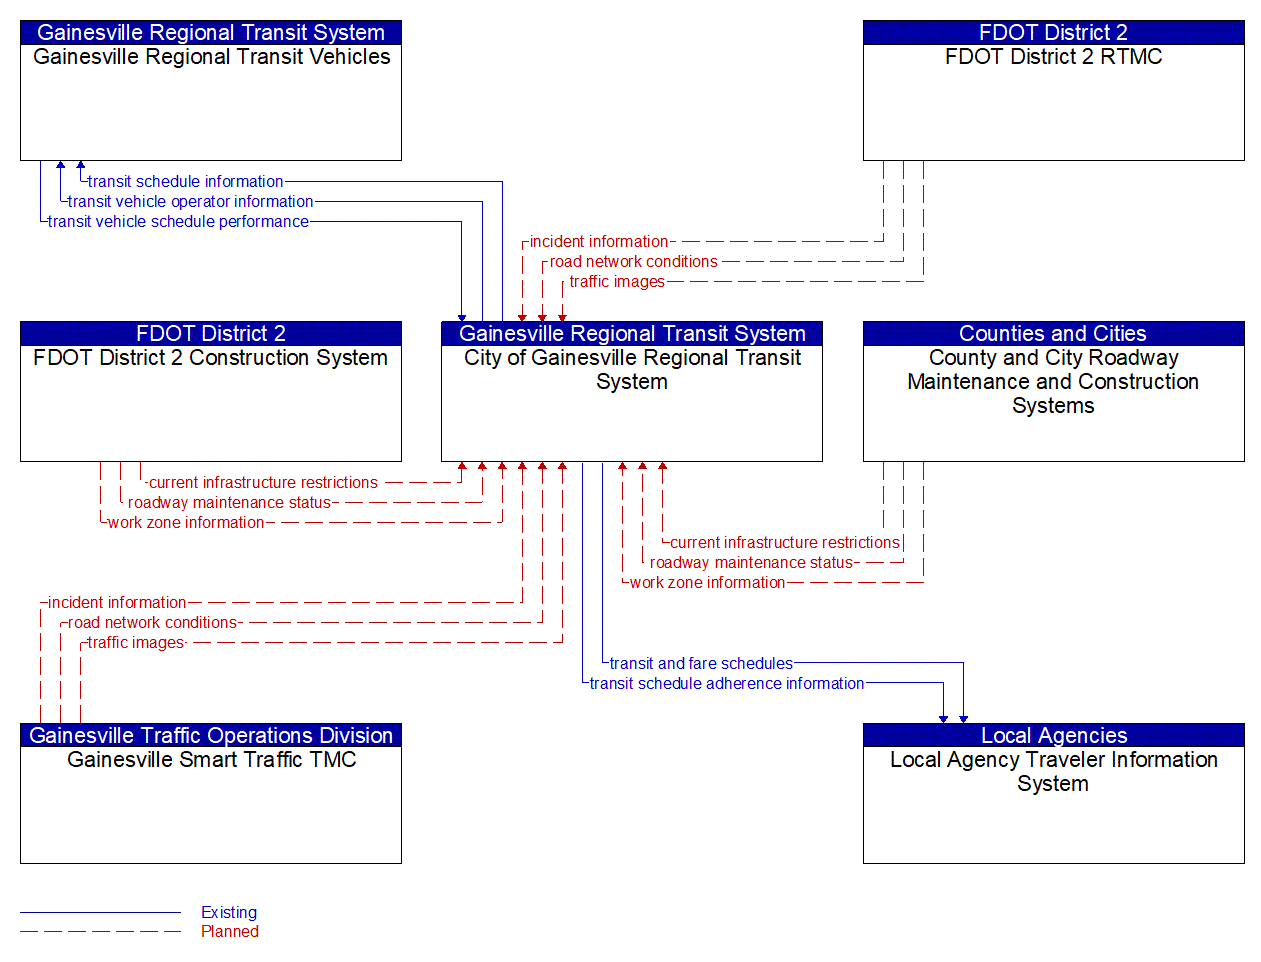 Service Graphic: Transit Fixed-Route Operations (Gainesville Regional Transit System)